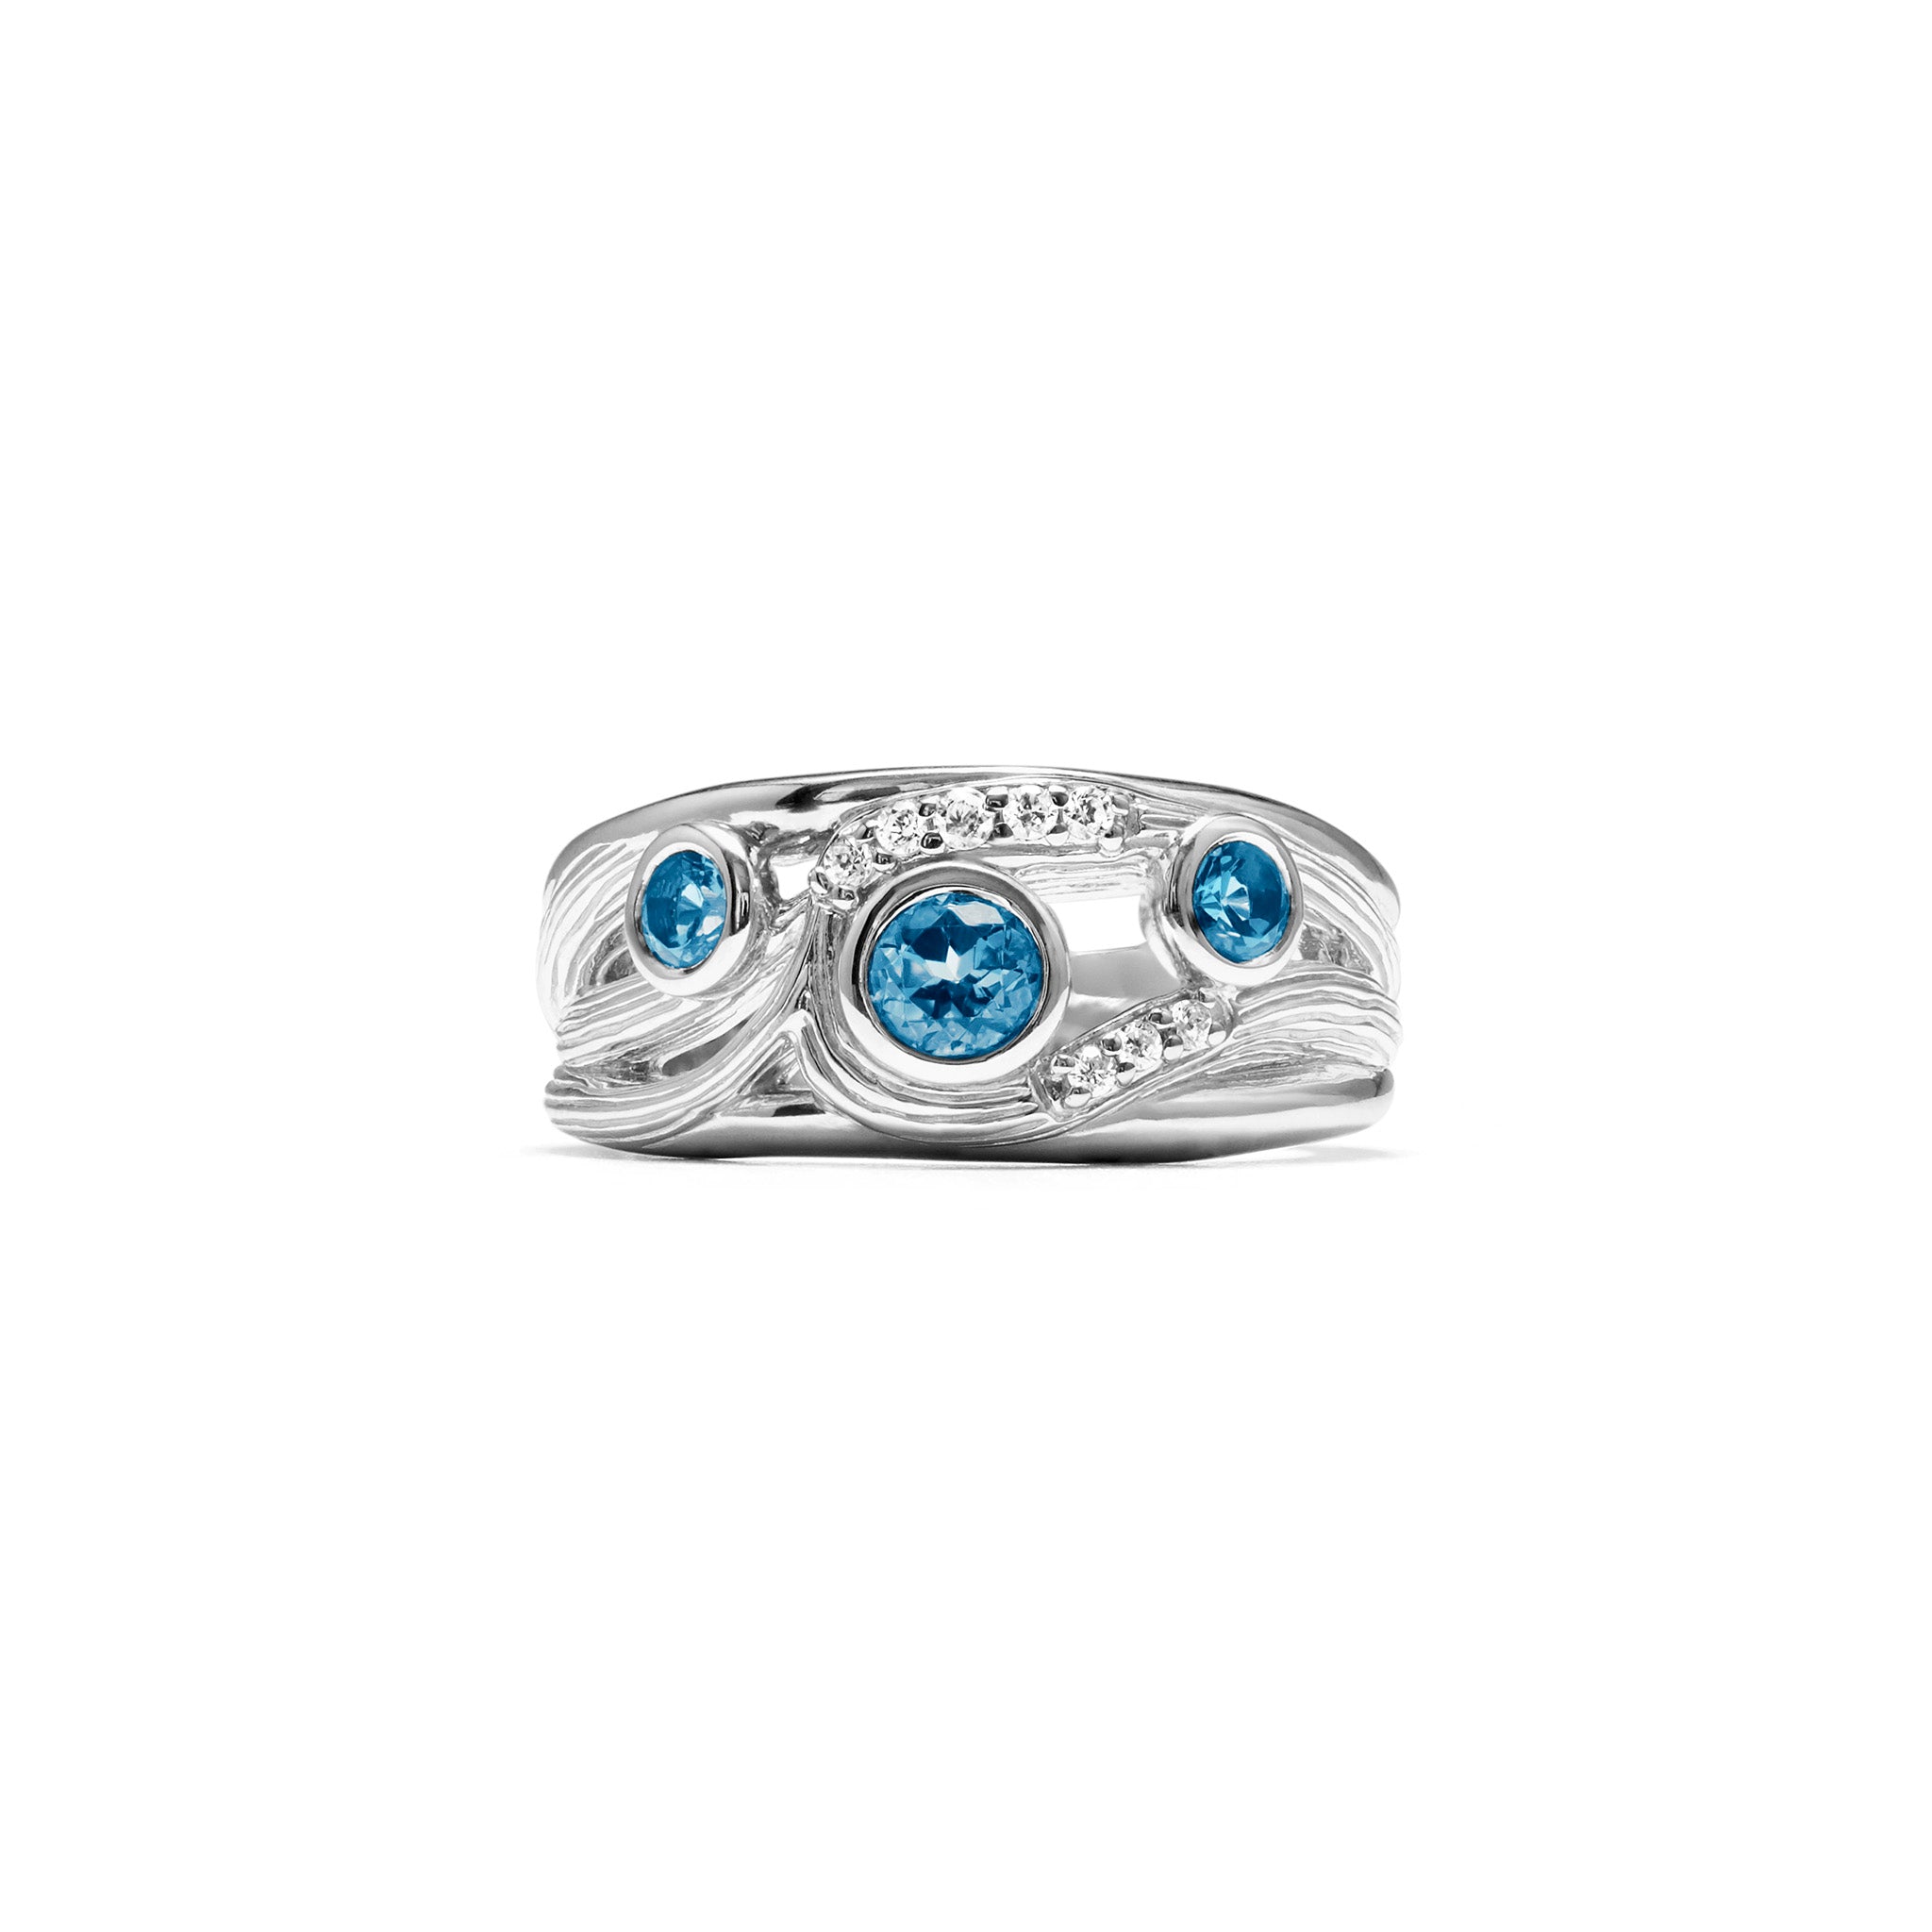 Santorini Band Ring With London Blue Topaz And Diamonds